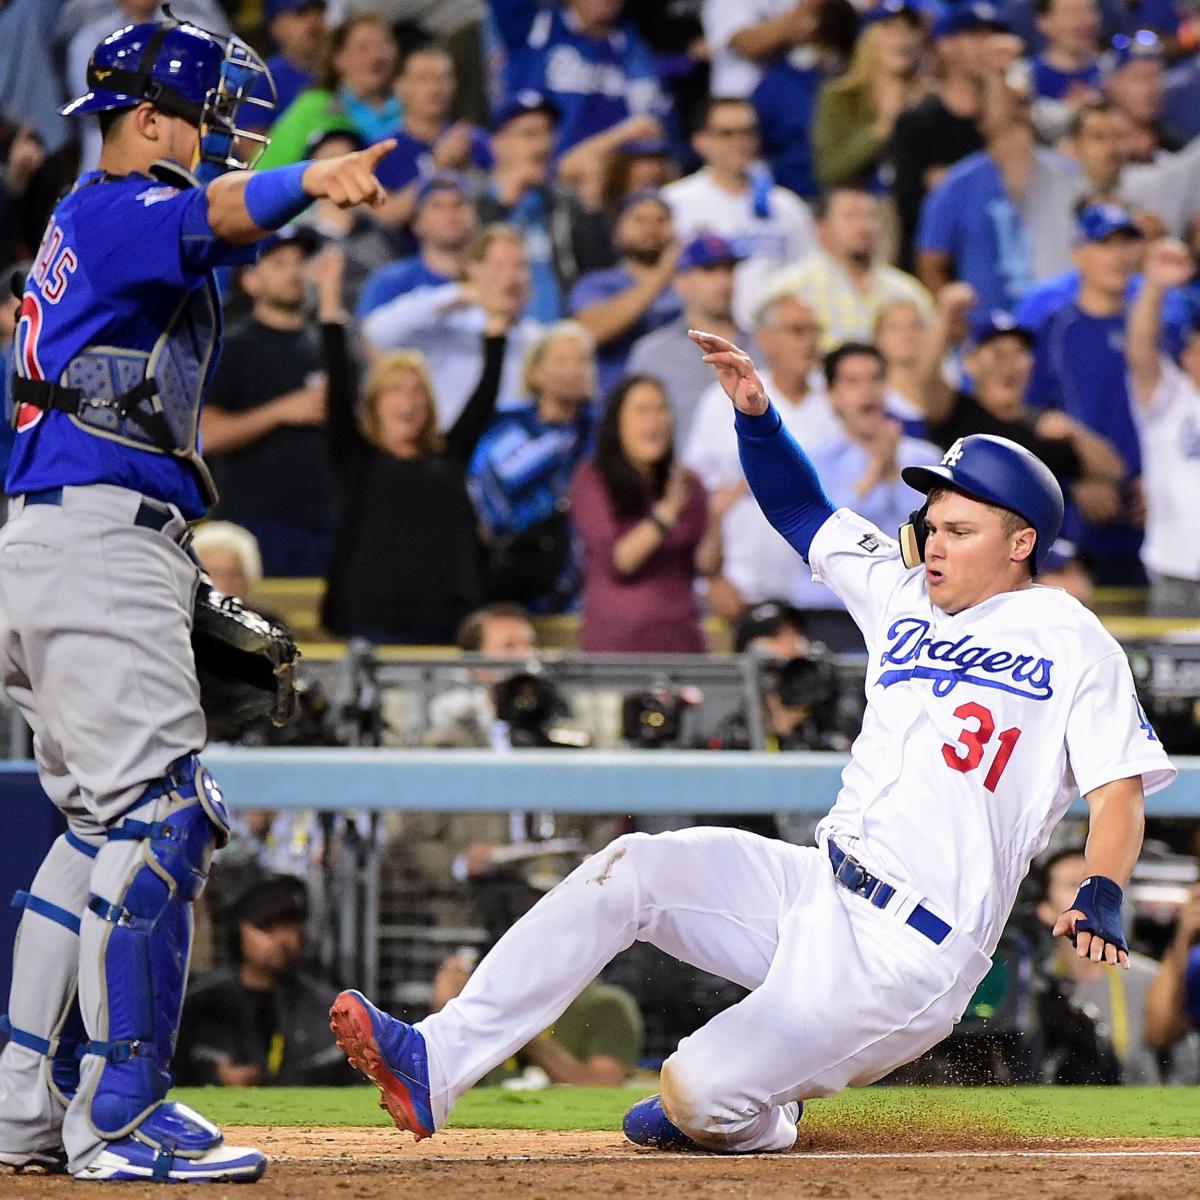 Cubs vs. Dodgers: NLCS Game 4 TV Schedule, Preview, and Pick